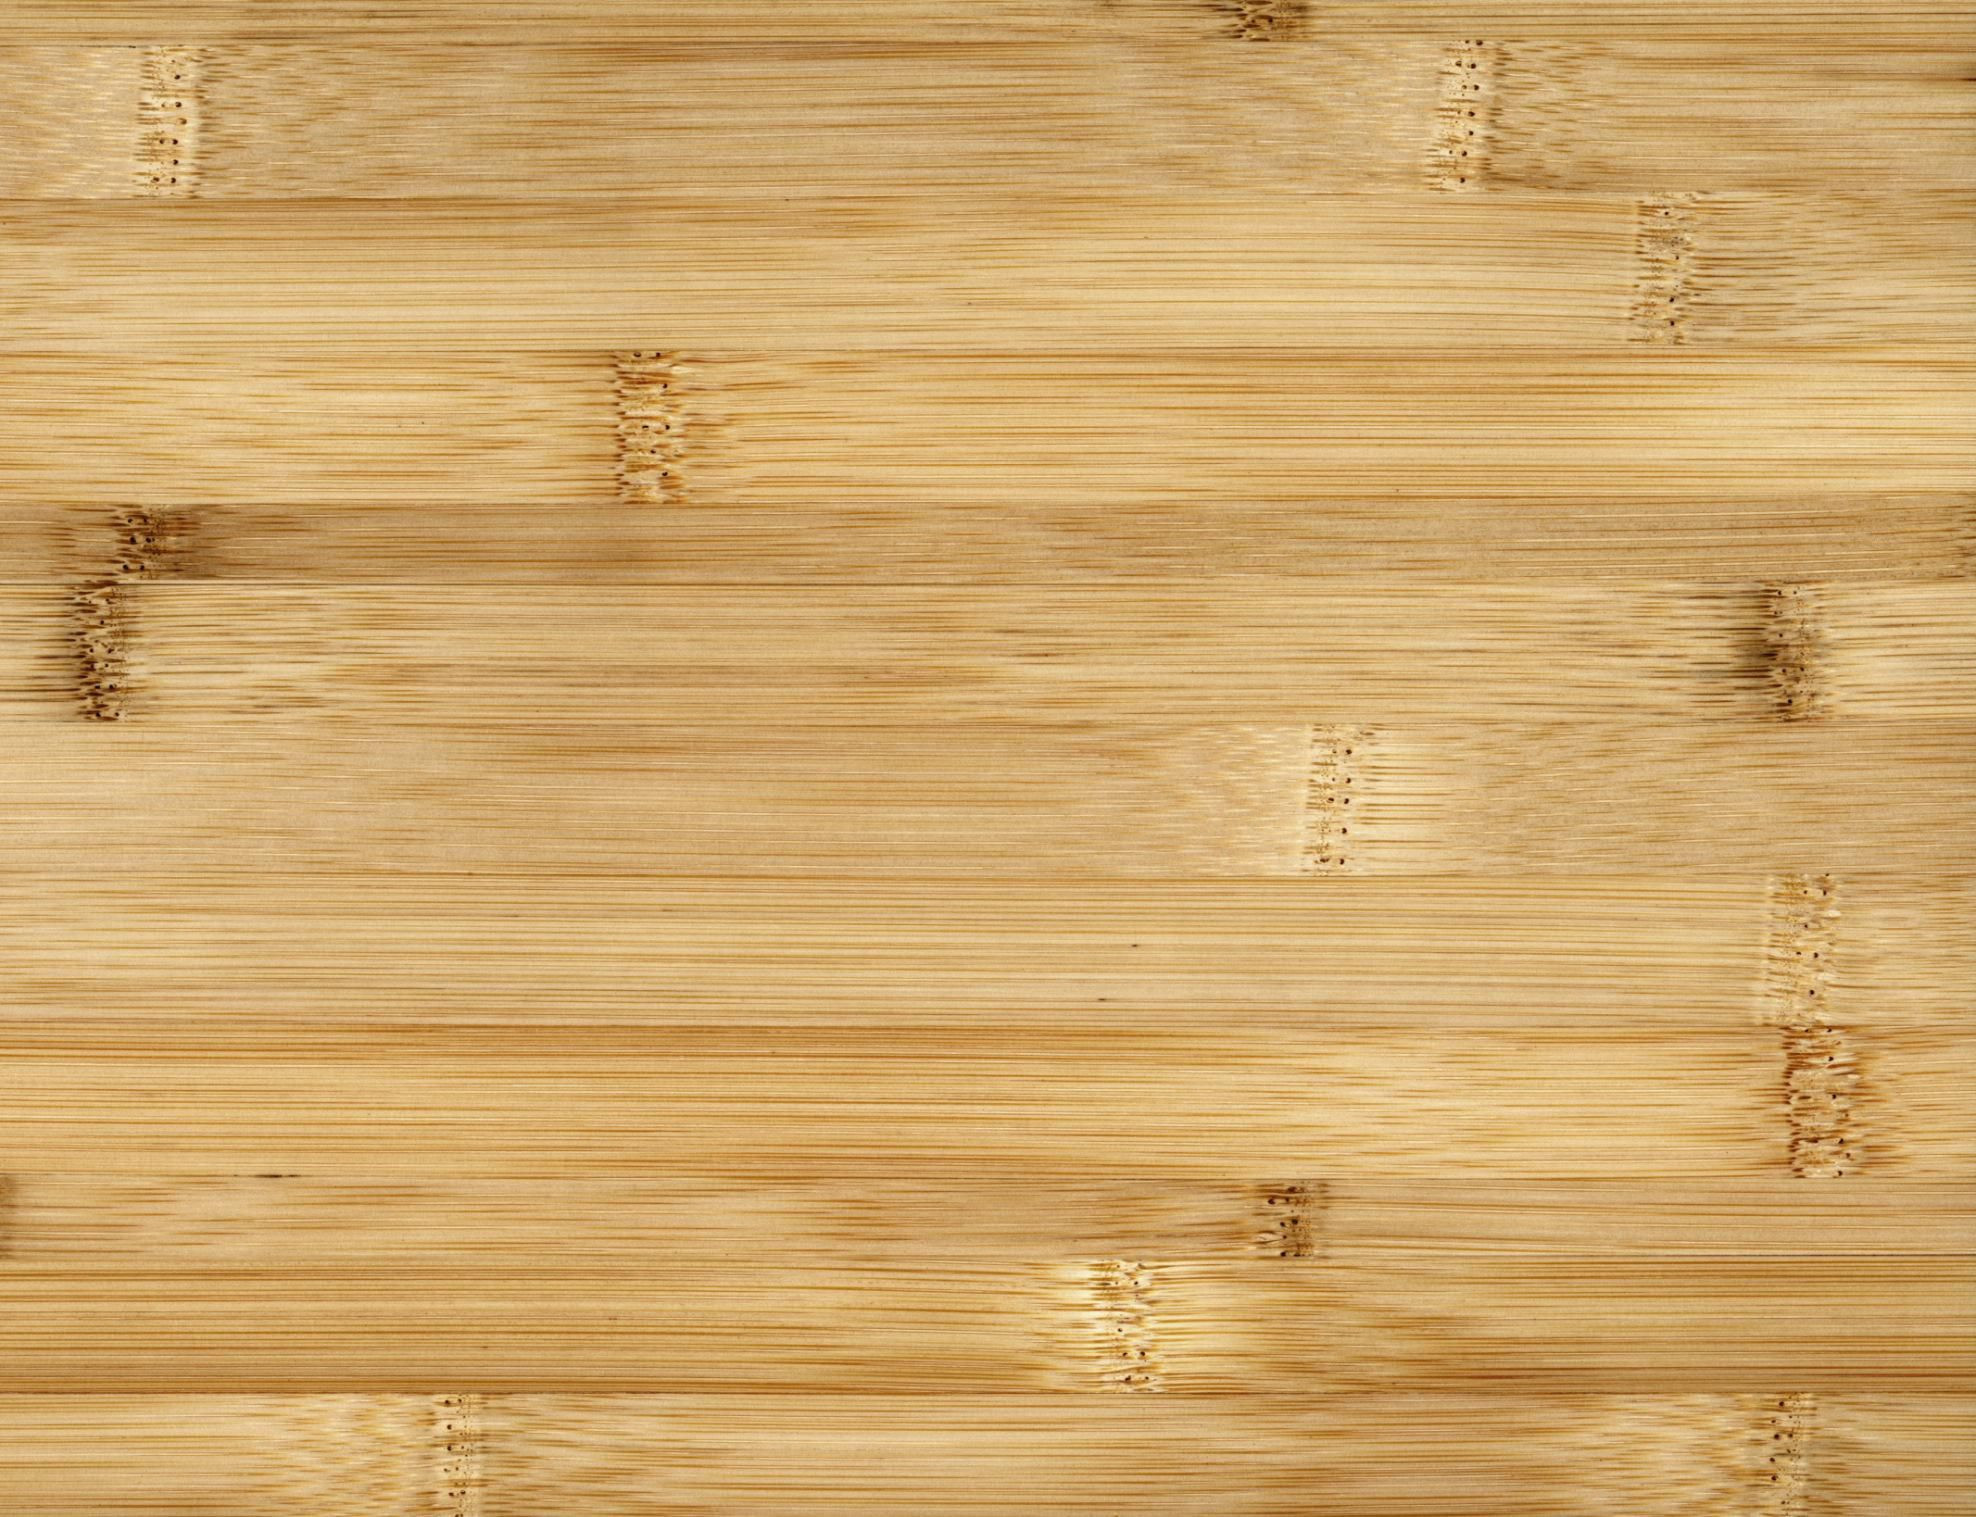 23 Fantastic Hardwood Floor Maintenance Cleaning 2023 free download hardwood floor maintenance cleaning of how to clean bamboo flooring for 200266305 001 56a2fd815f9b58b7d0d000cd